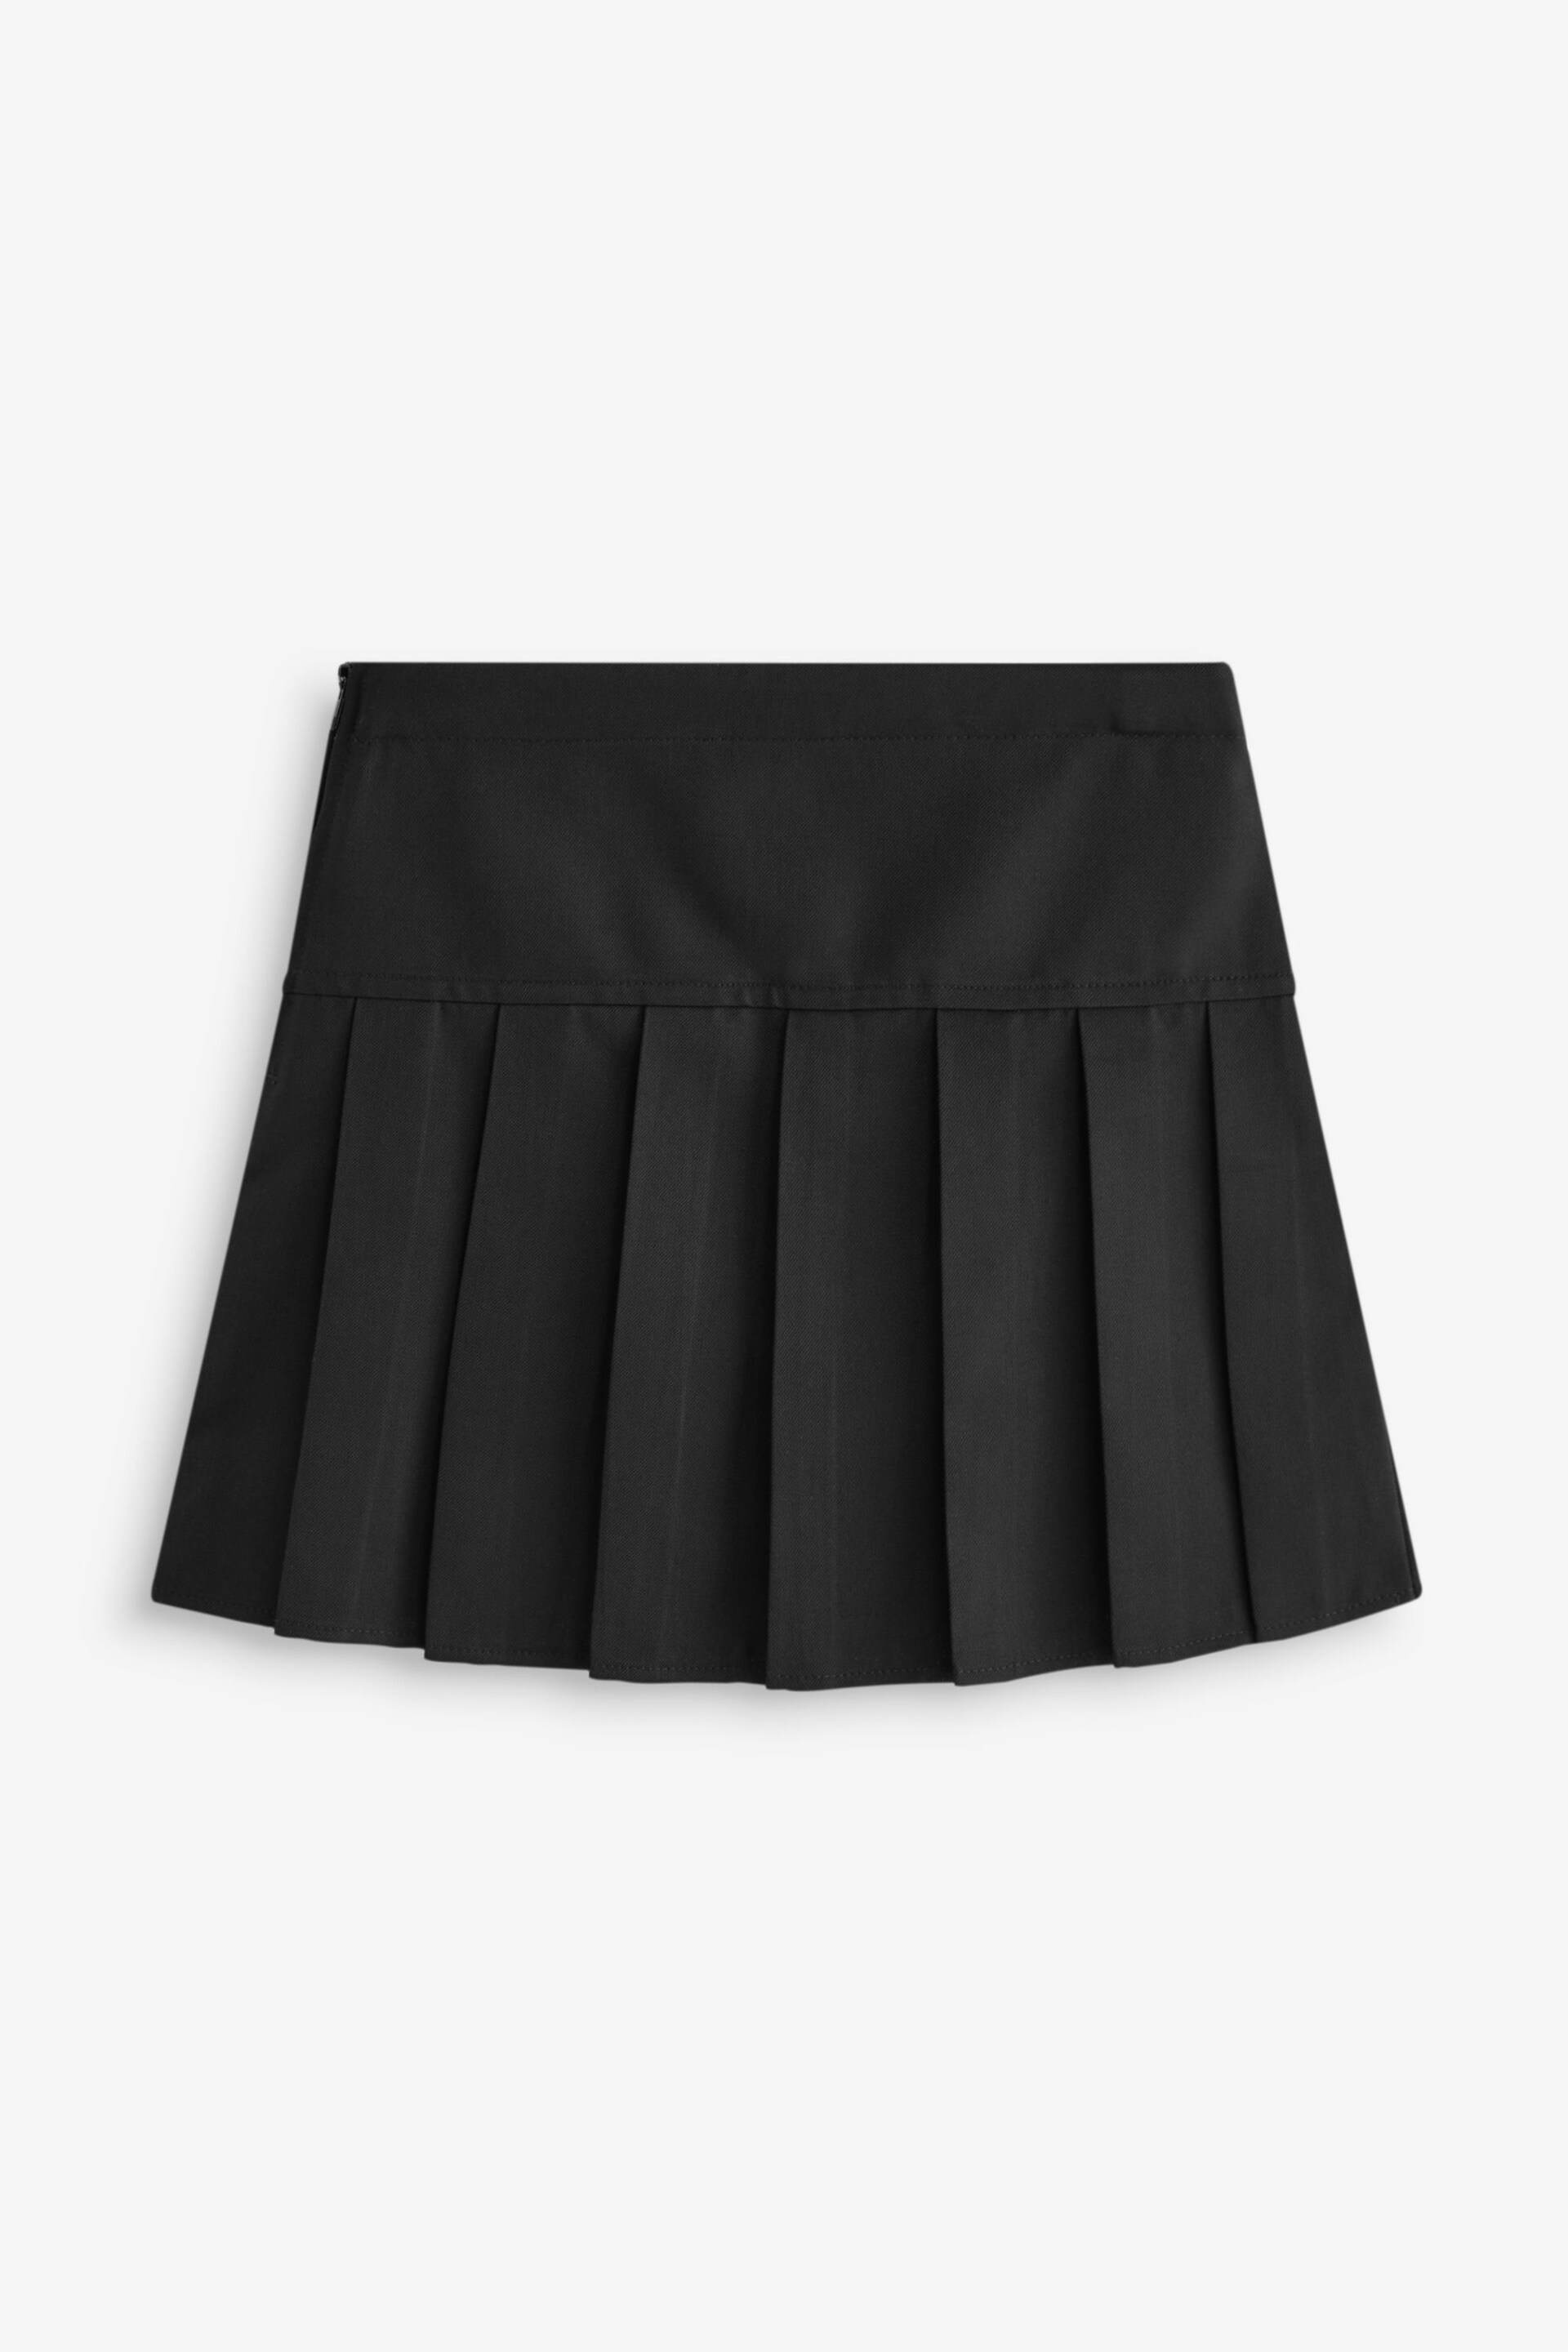 Black Pleat Skirt And Cycle Shorts Set (3-17yrs) - Image 6 of 9